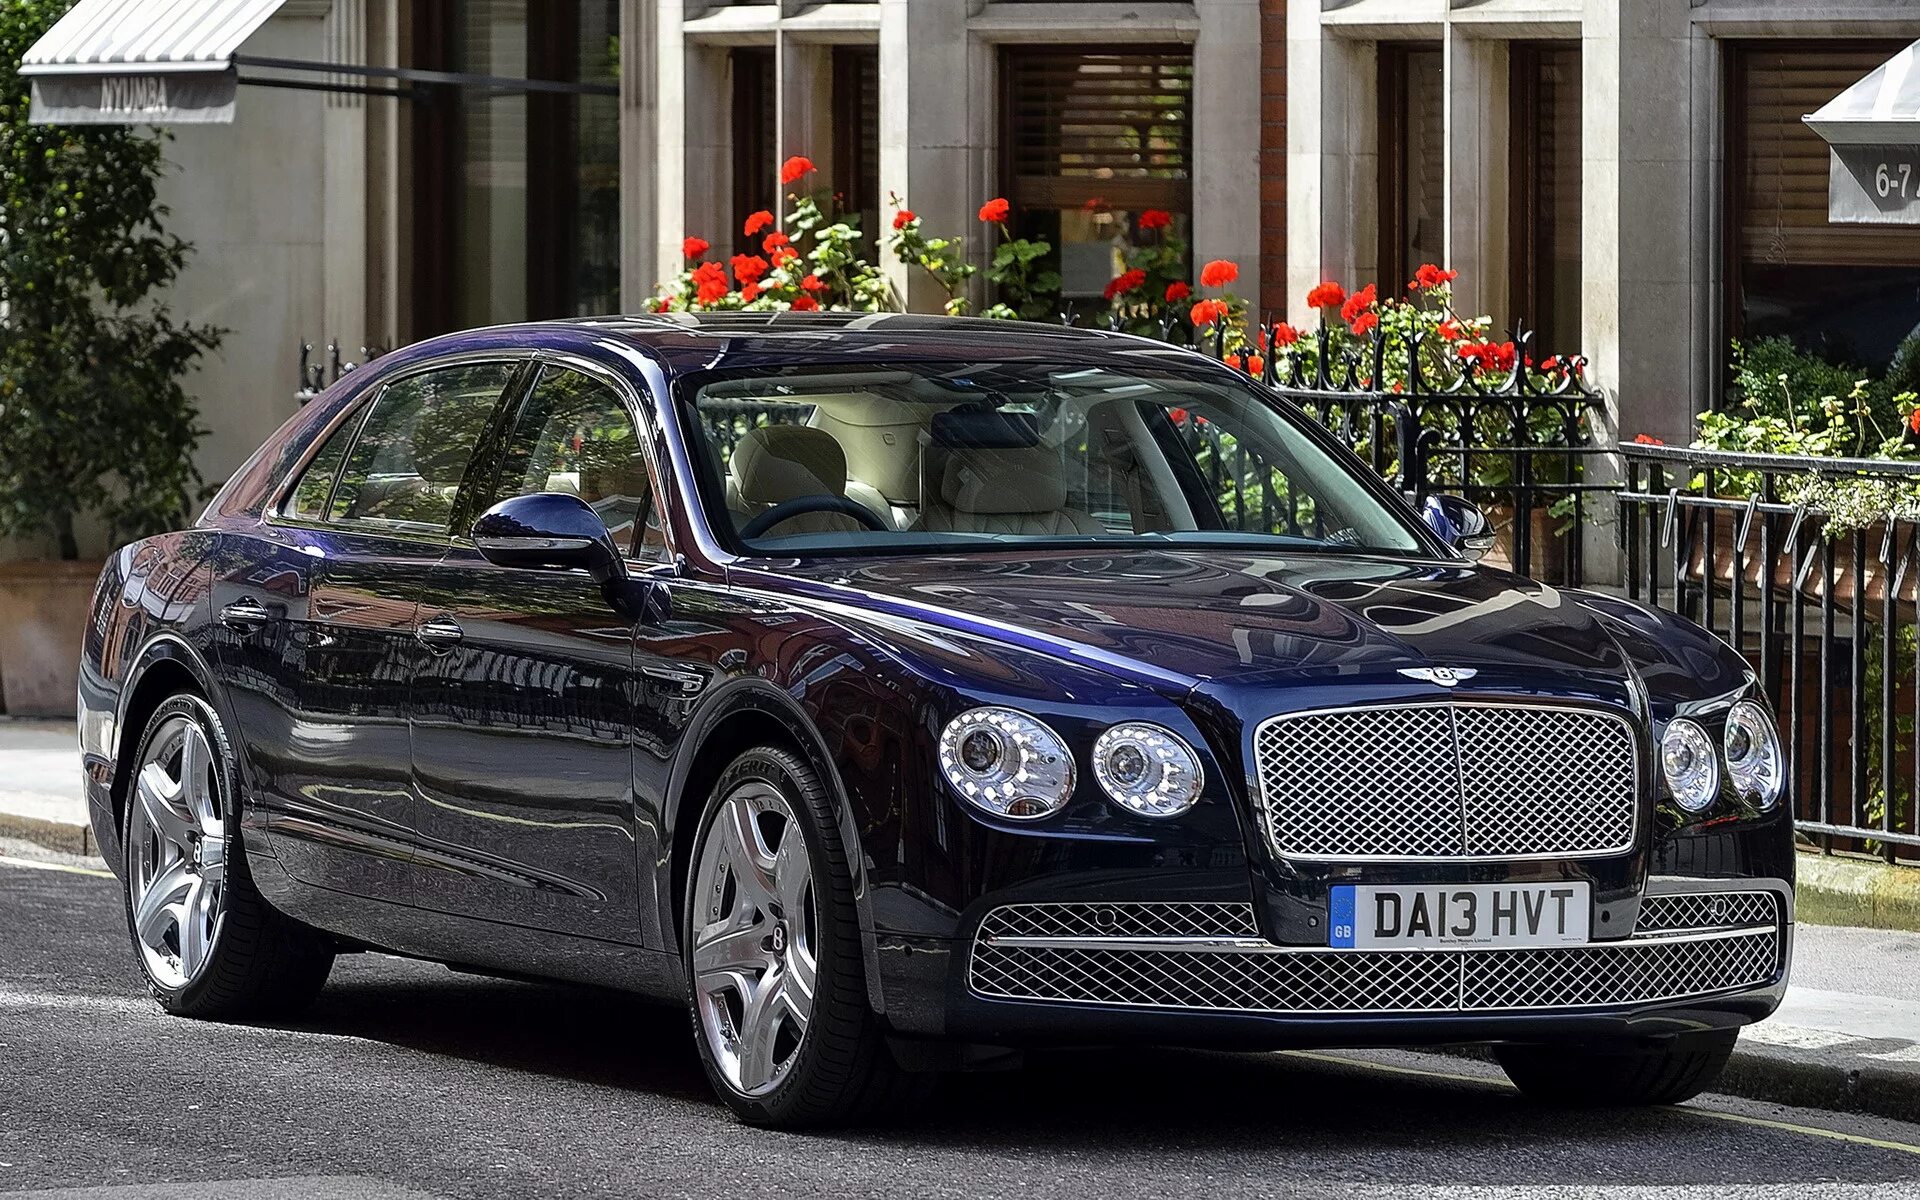 Бентли flying spur. Bentley Flying Spur 2013. Bentley Flying Spur 4.0. Бентли Флаинг Спур 2022.